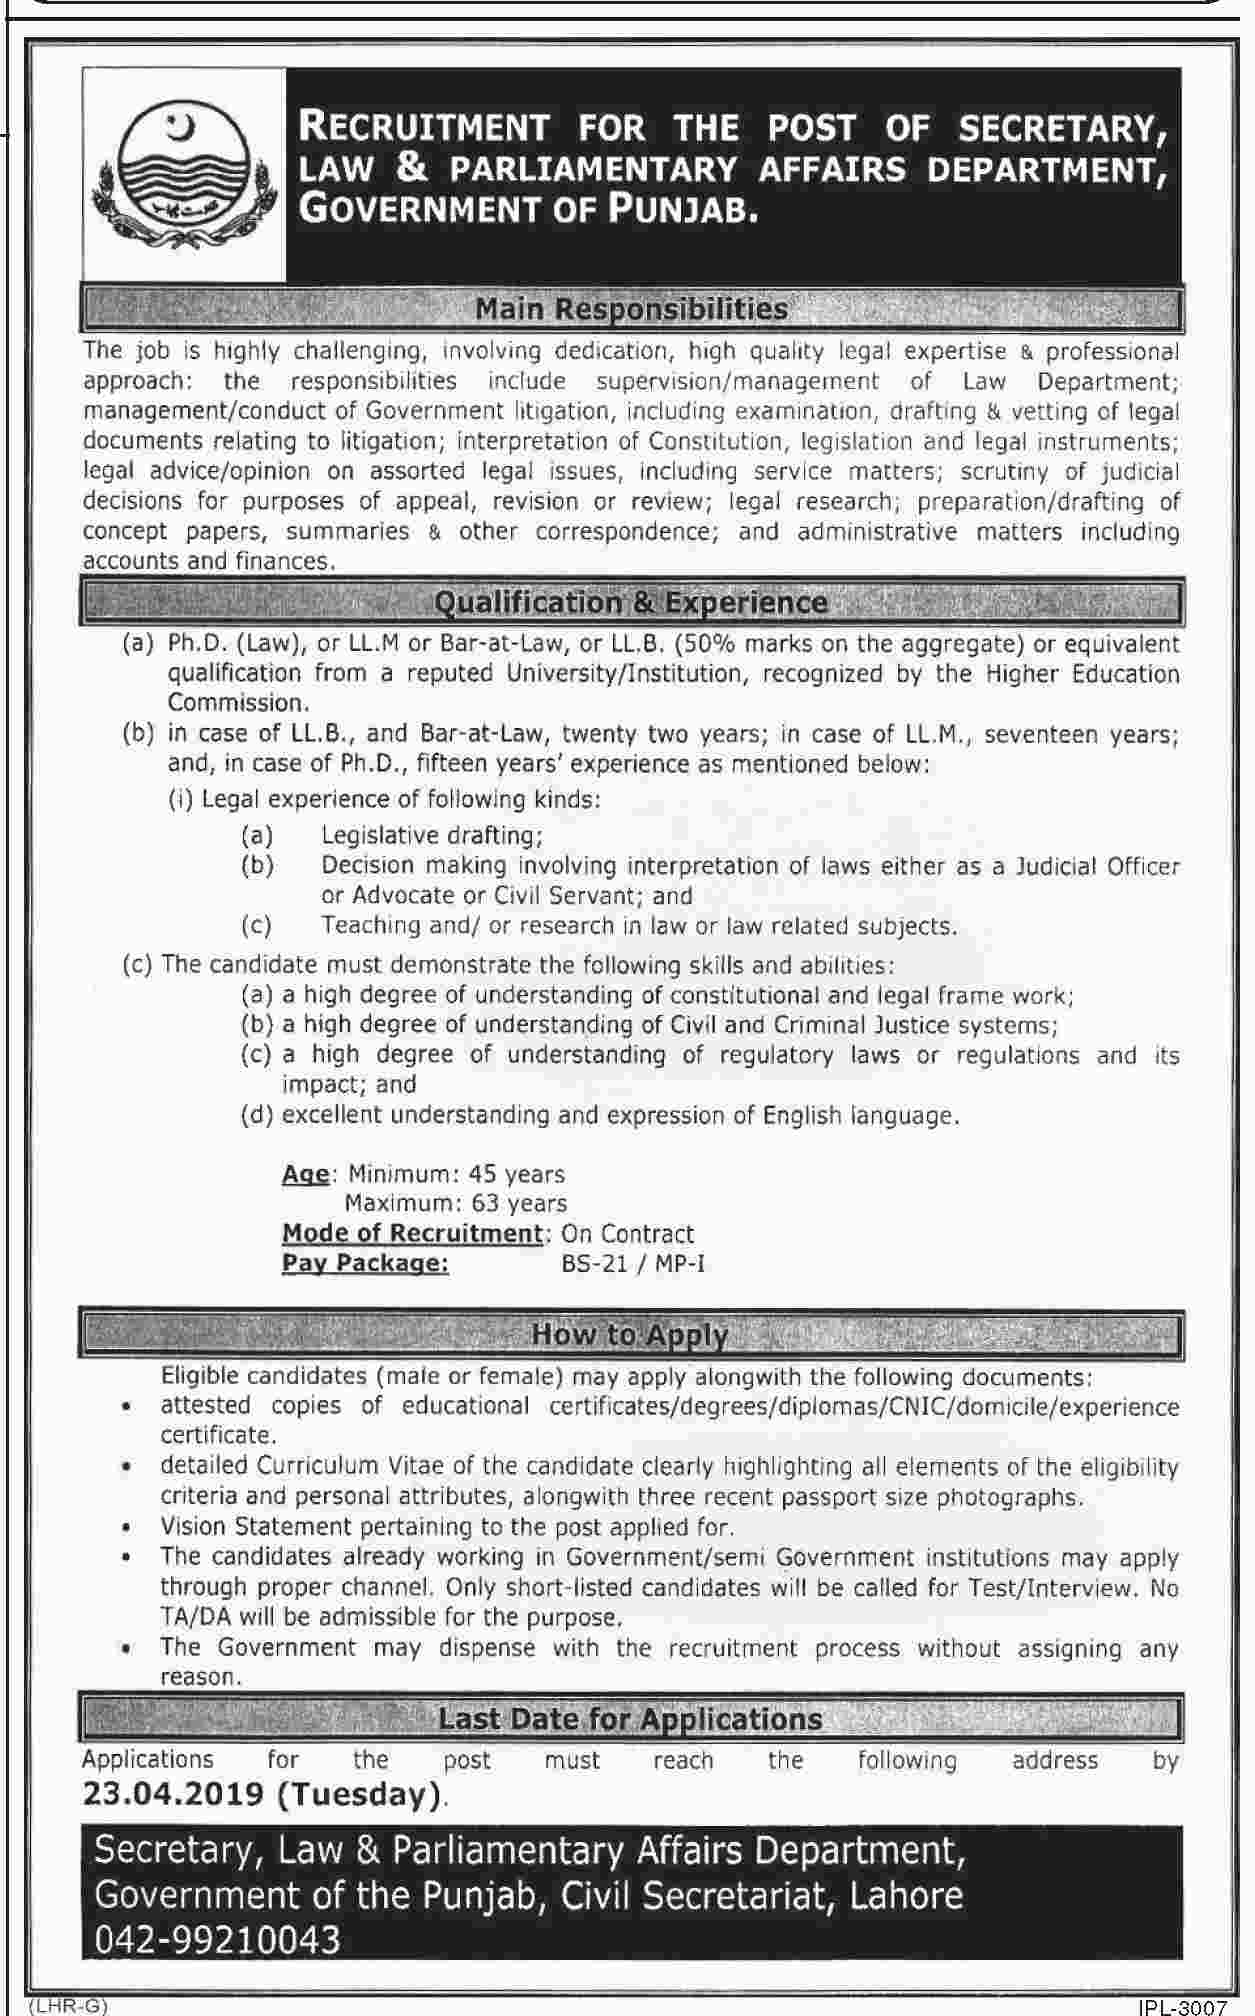 Law and Parliamentary Affairs Department Govt of Punjab jobs 2019